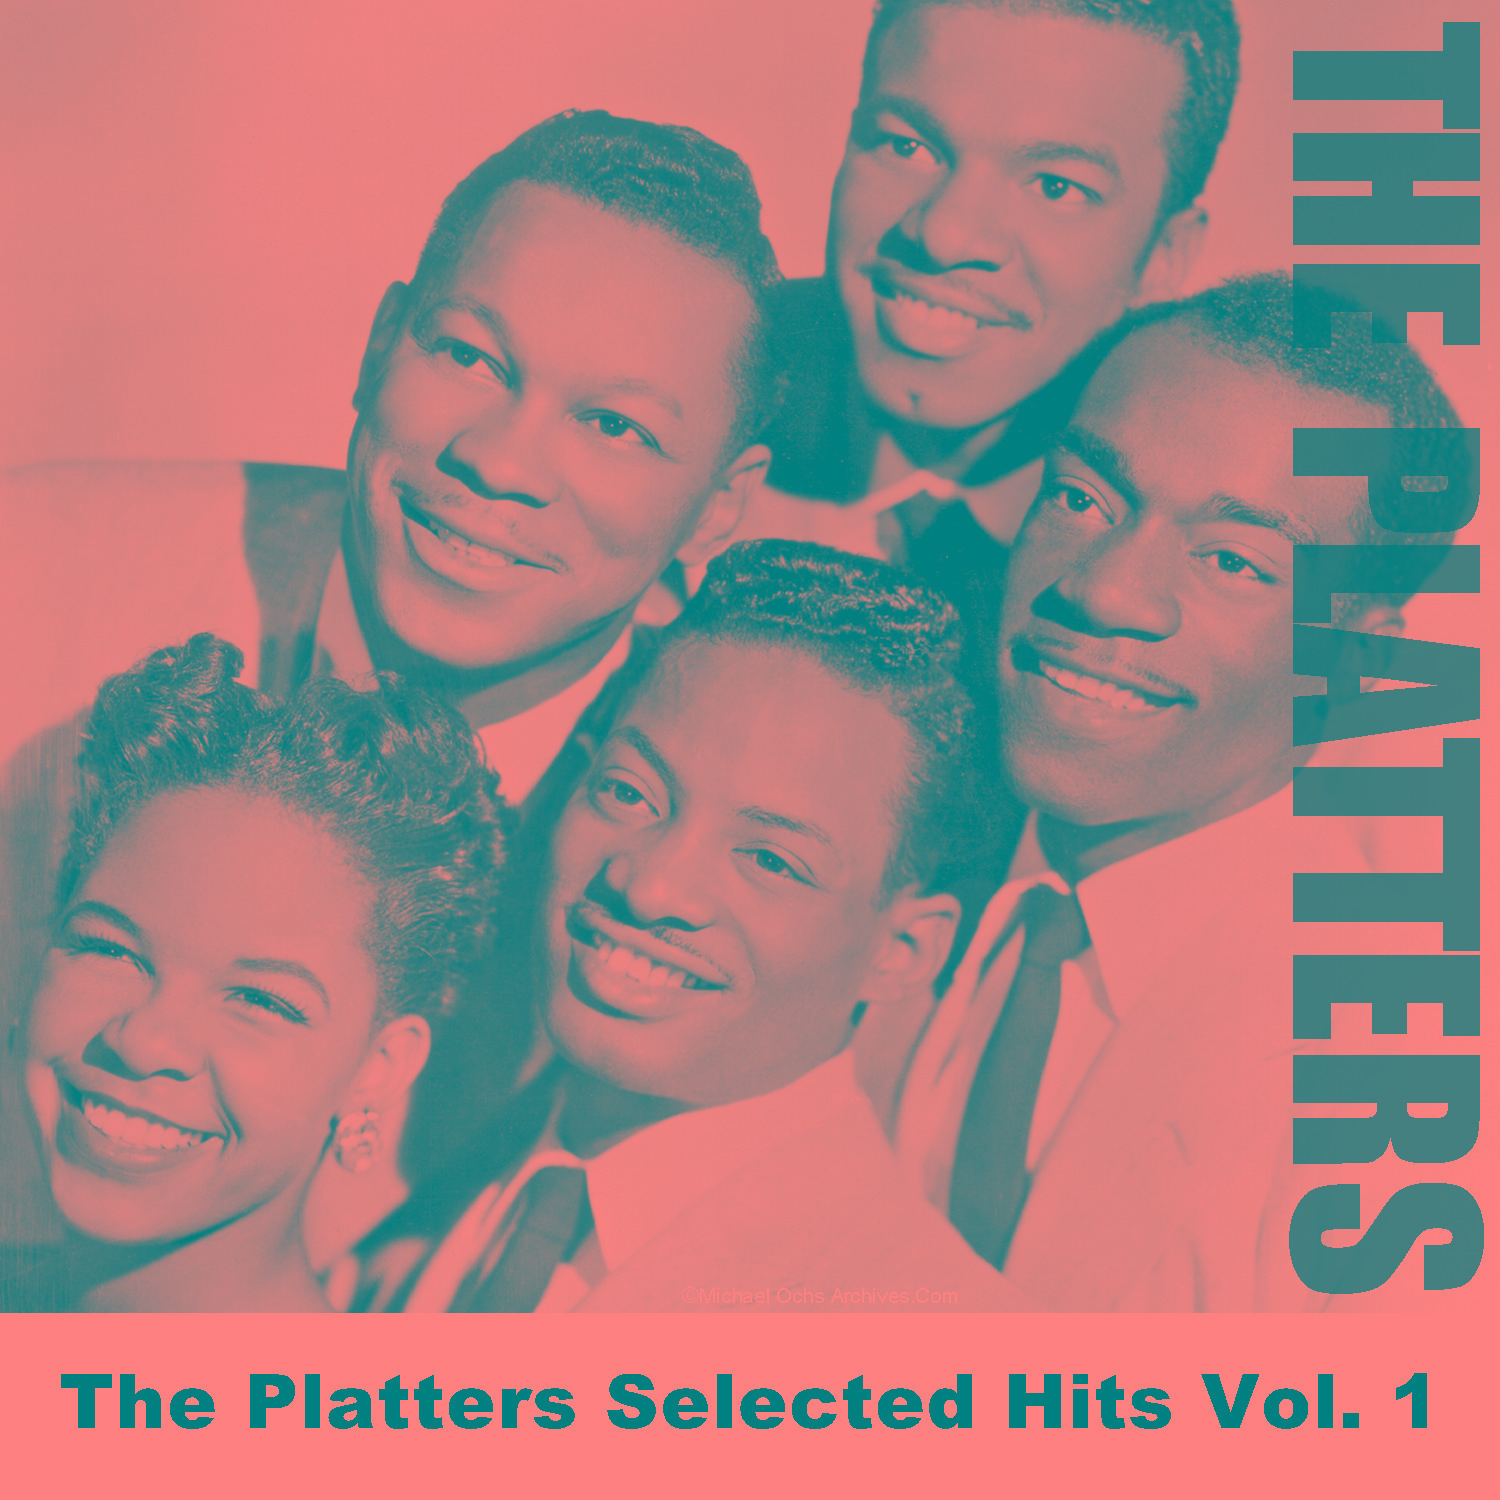 The Platters Selected Hits Vol. 1